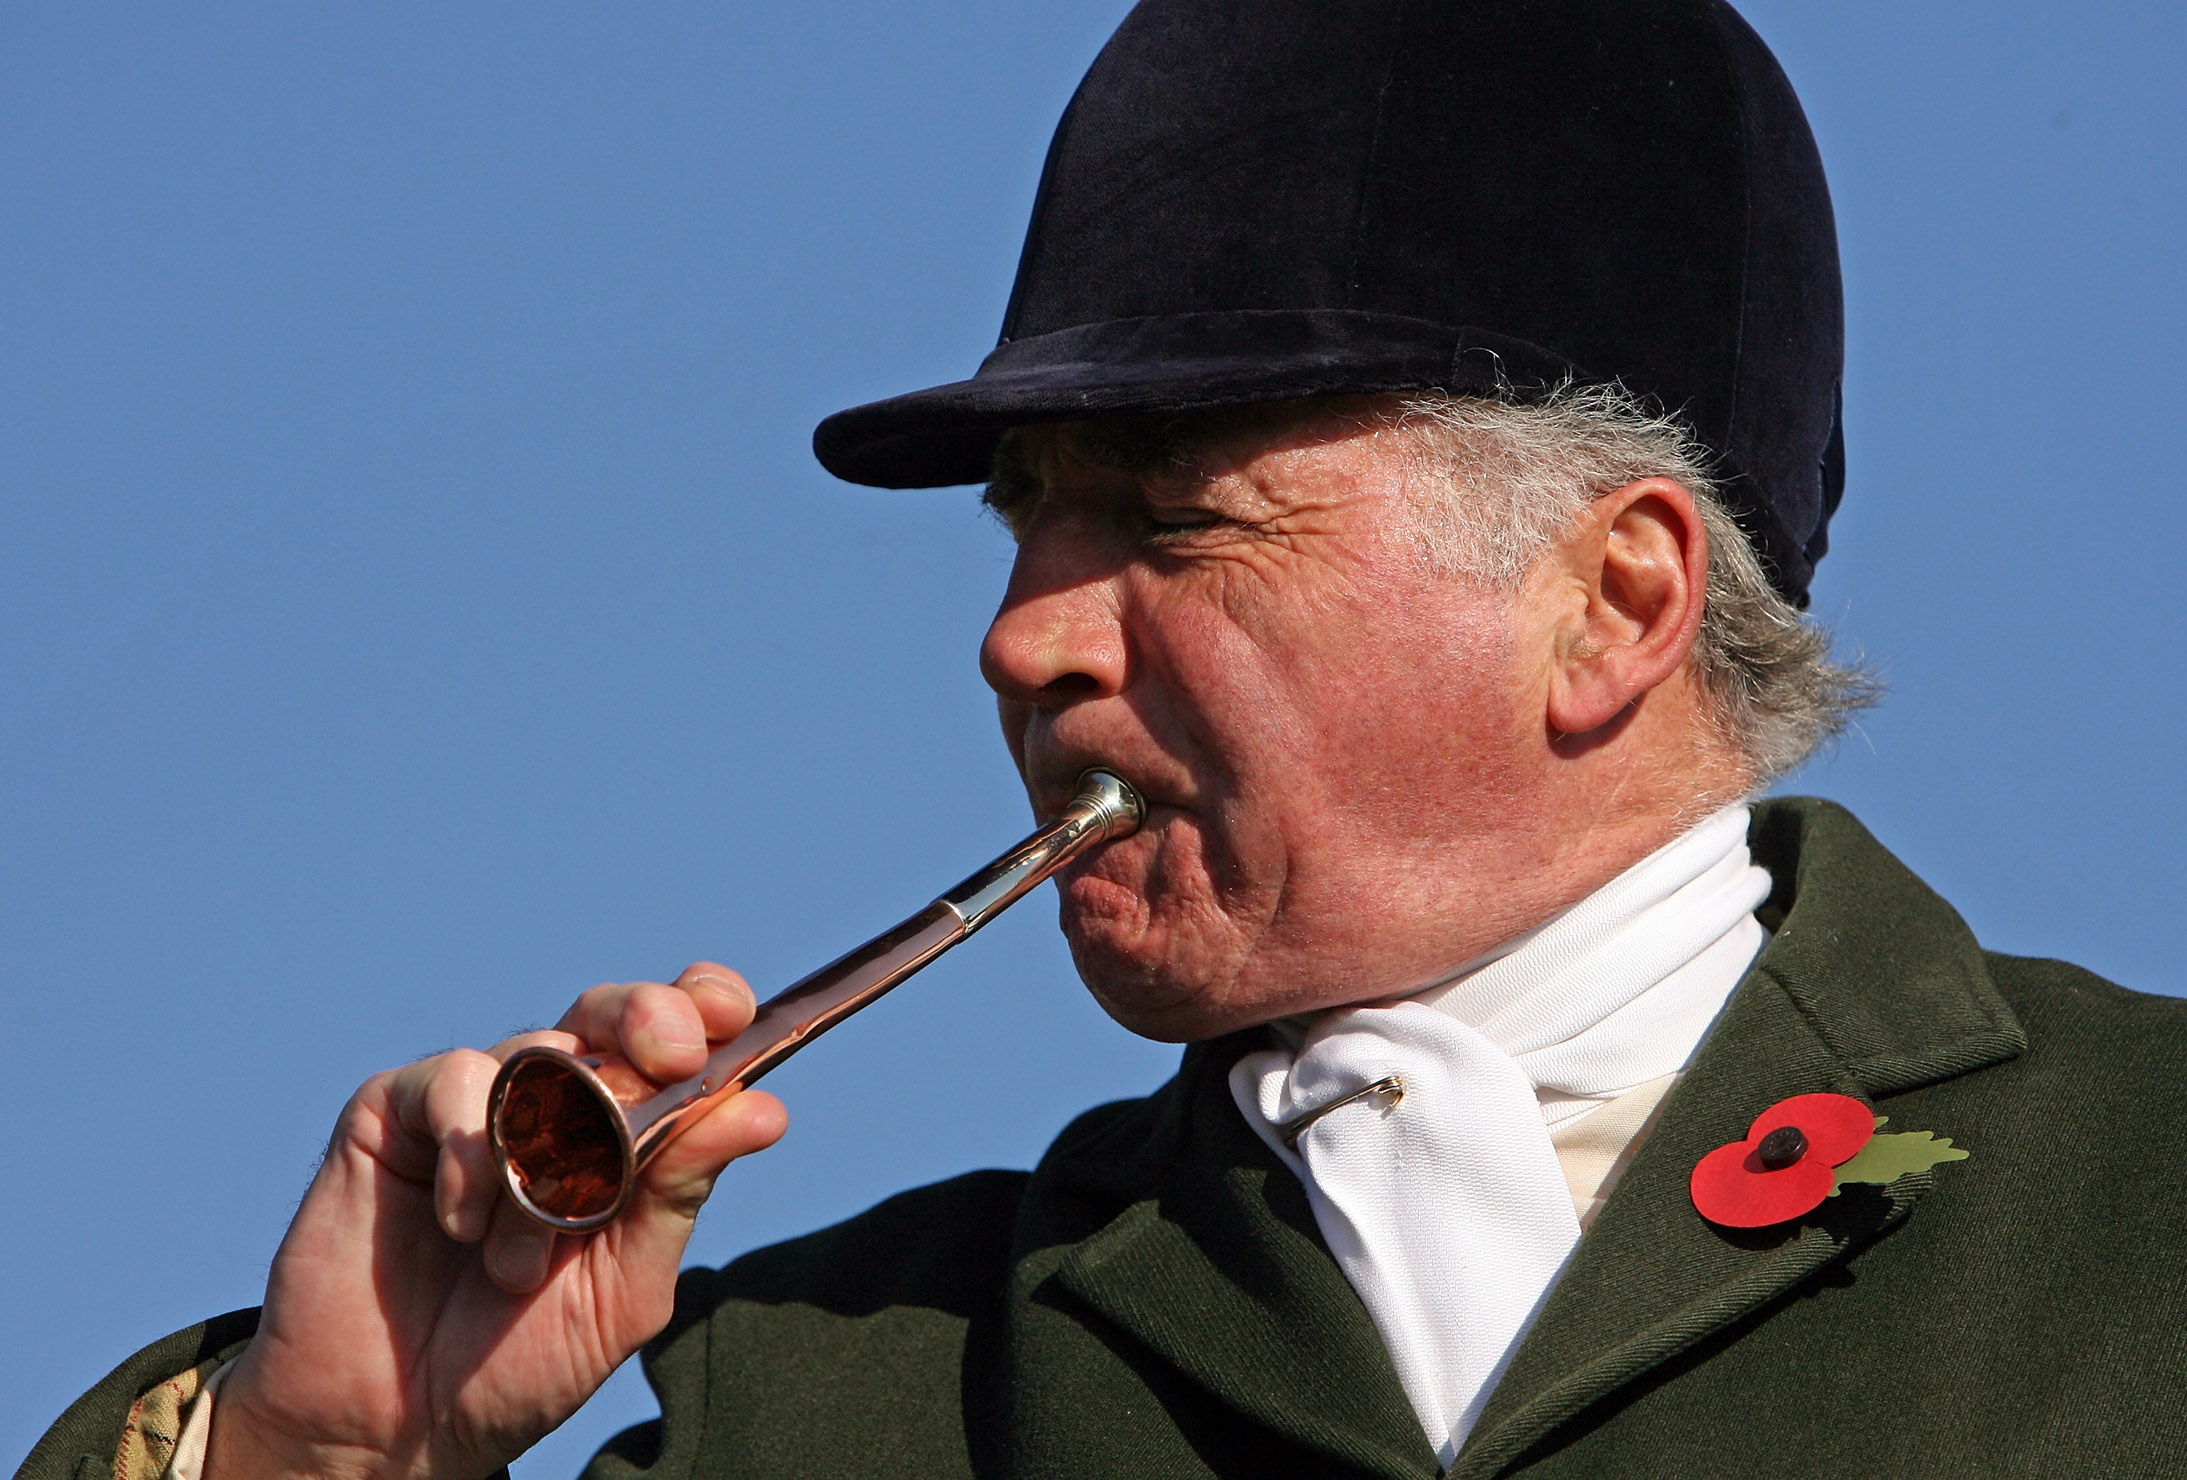 Captain Ian Farquhar sounds his hunting horn on November 3 2007 in Gloucestershire, England | Source: Getty Images